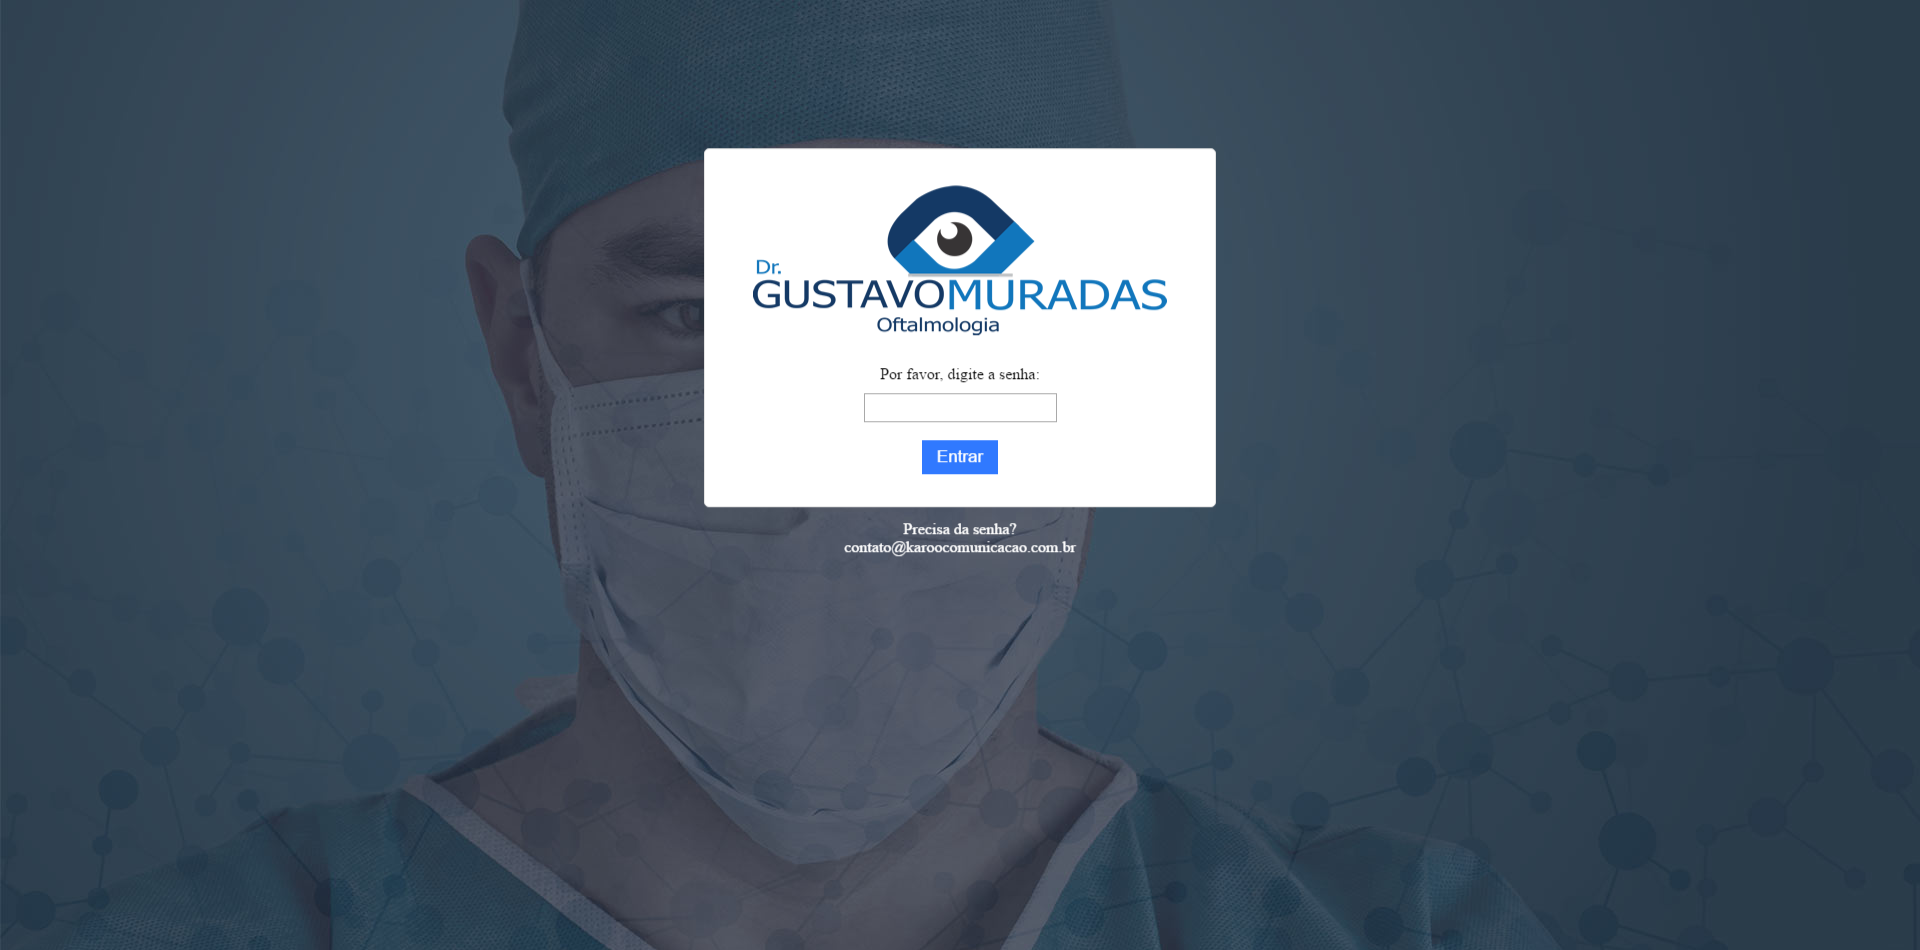 Example of layout with custom logo, background and strings translated to Brazilian Portuguese